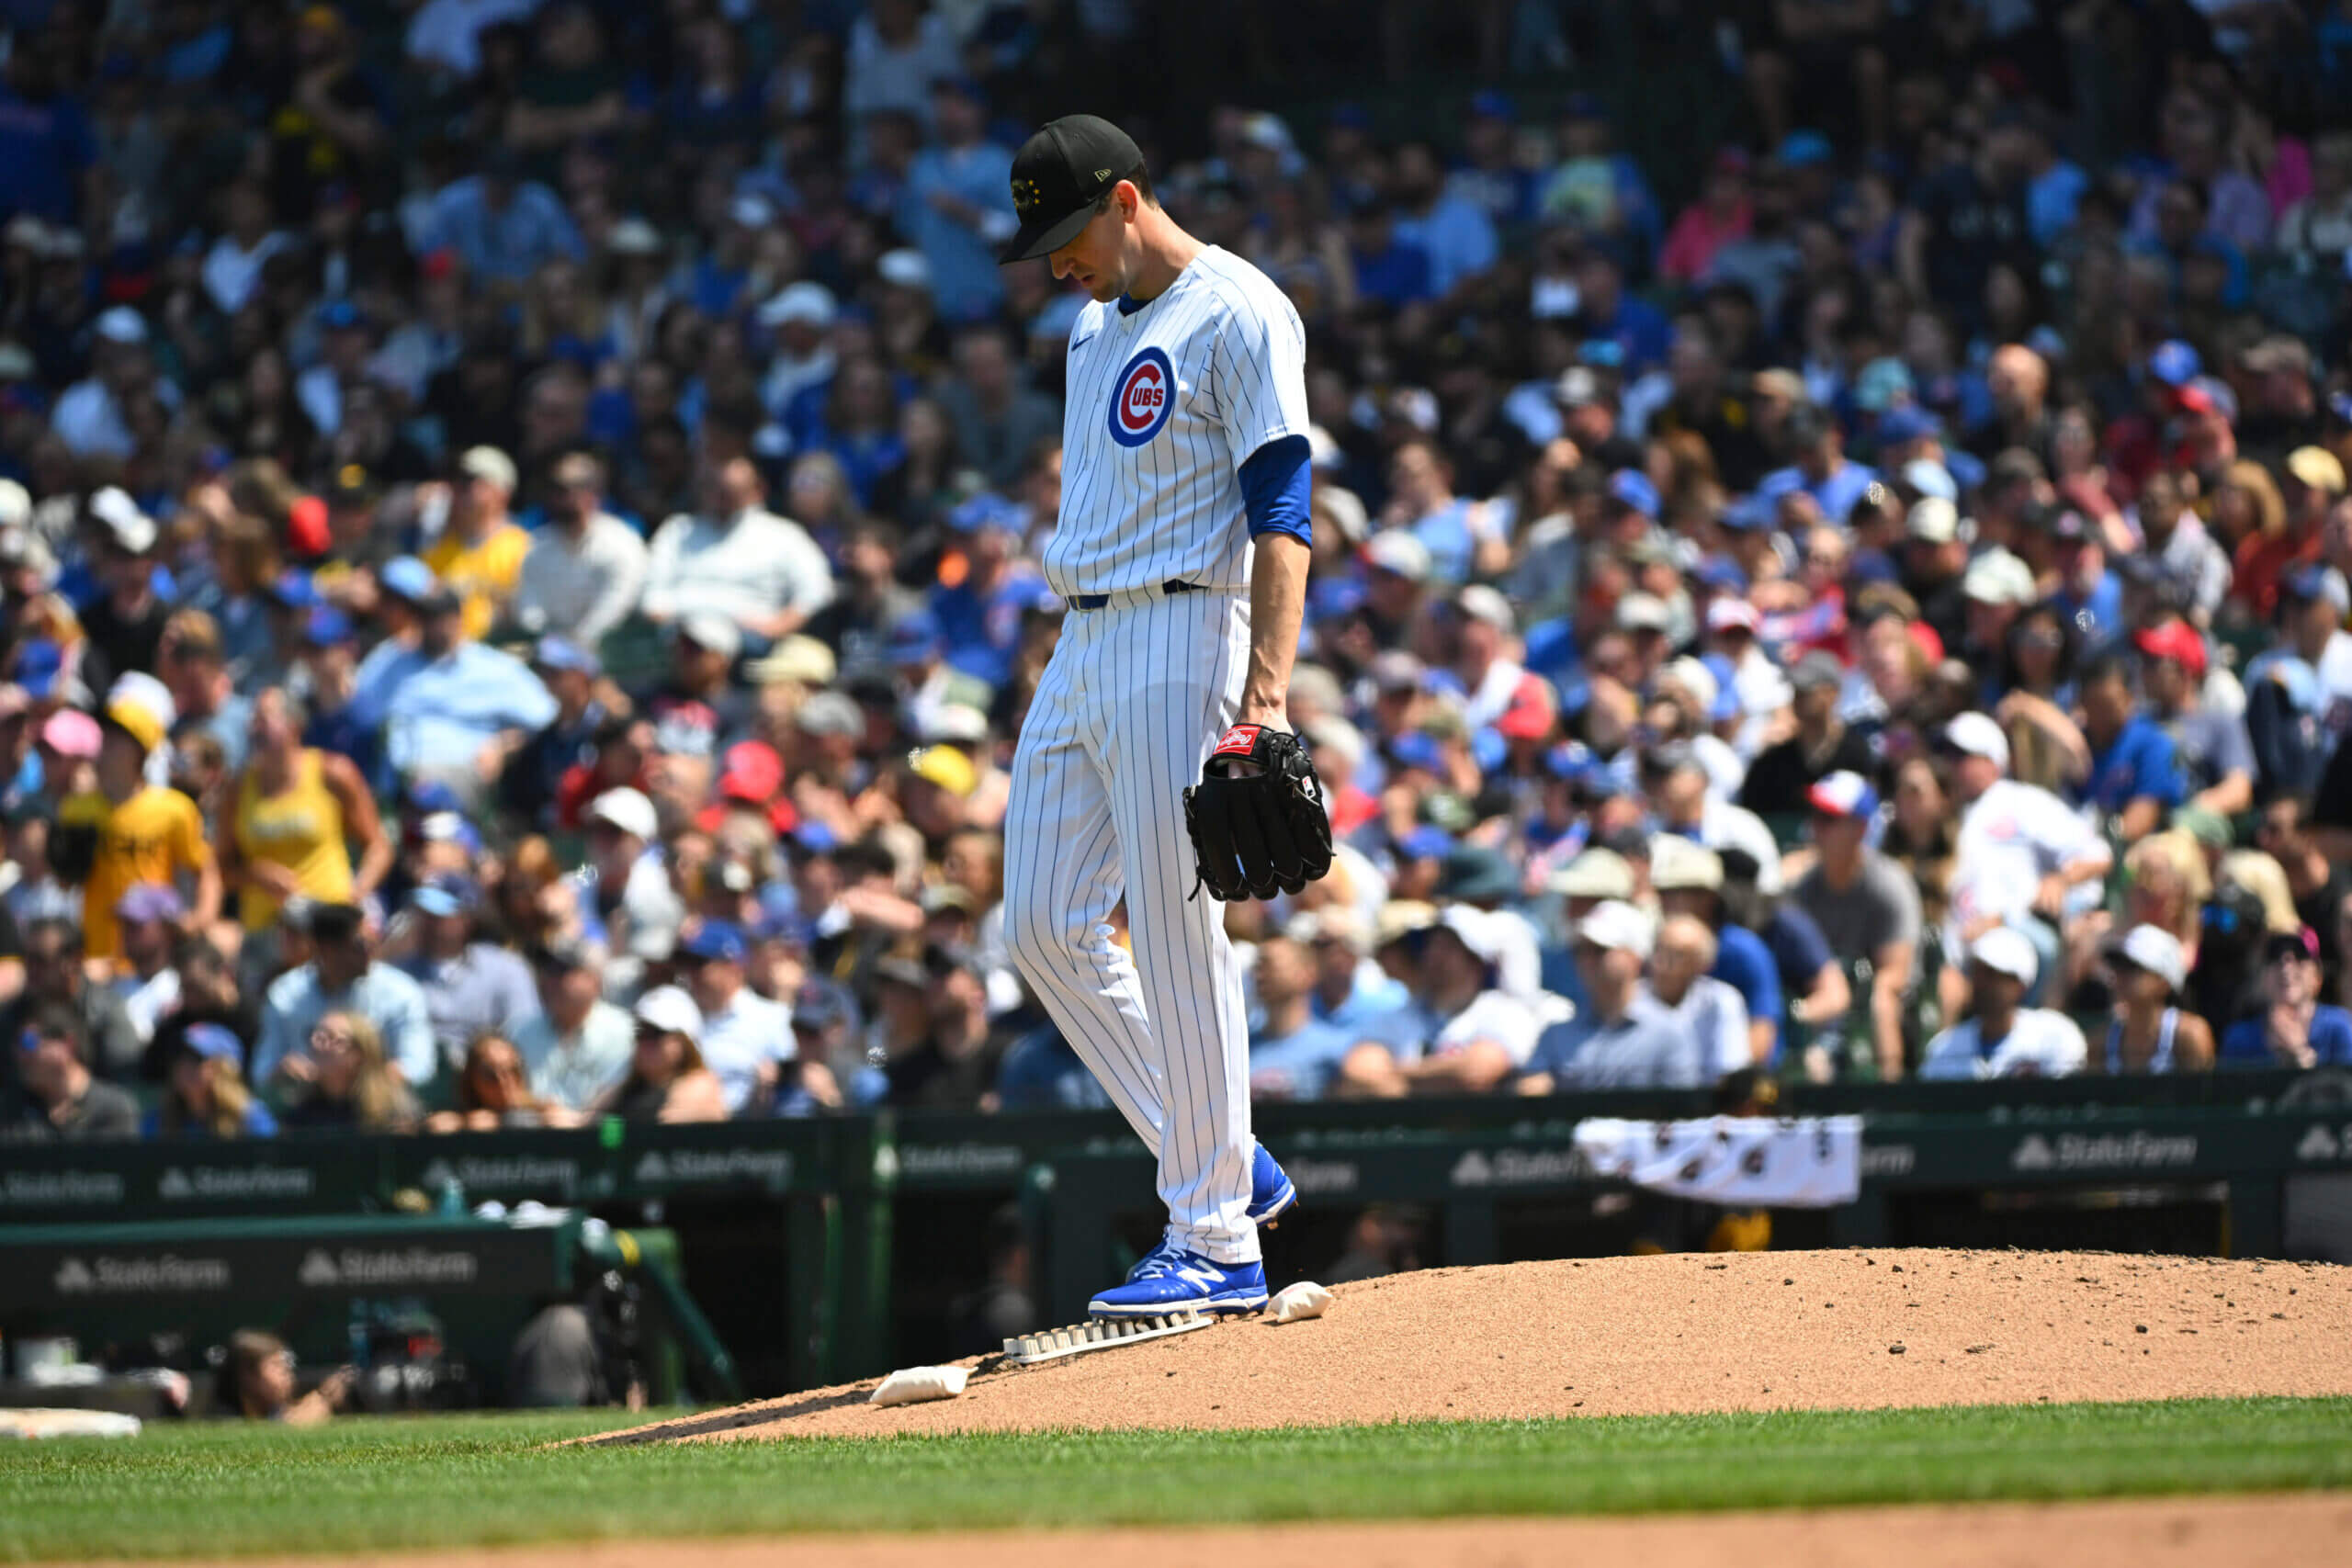 Despite demotion to bullpen, Cubs still need Kyle Hendricks to help in any way he can